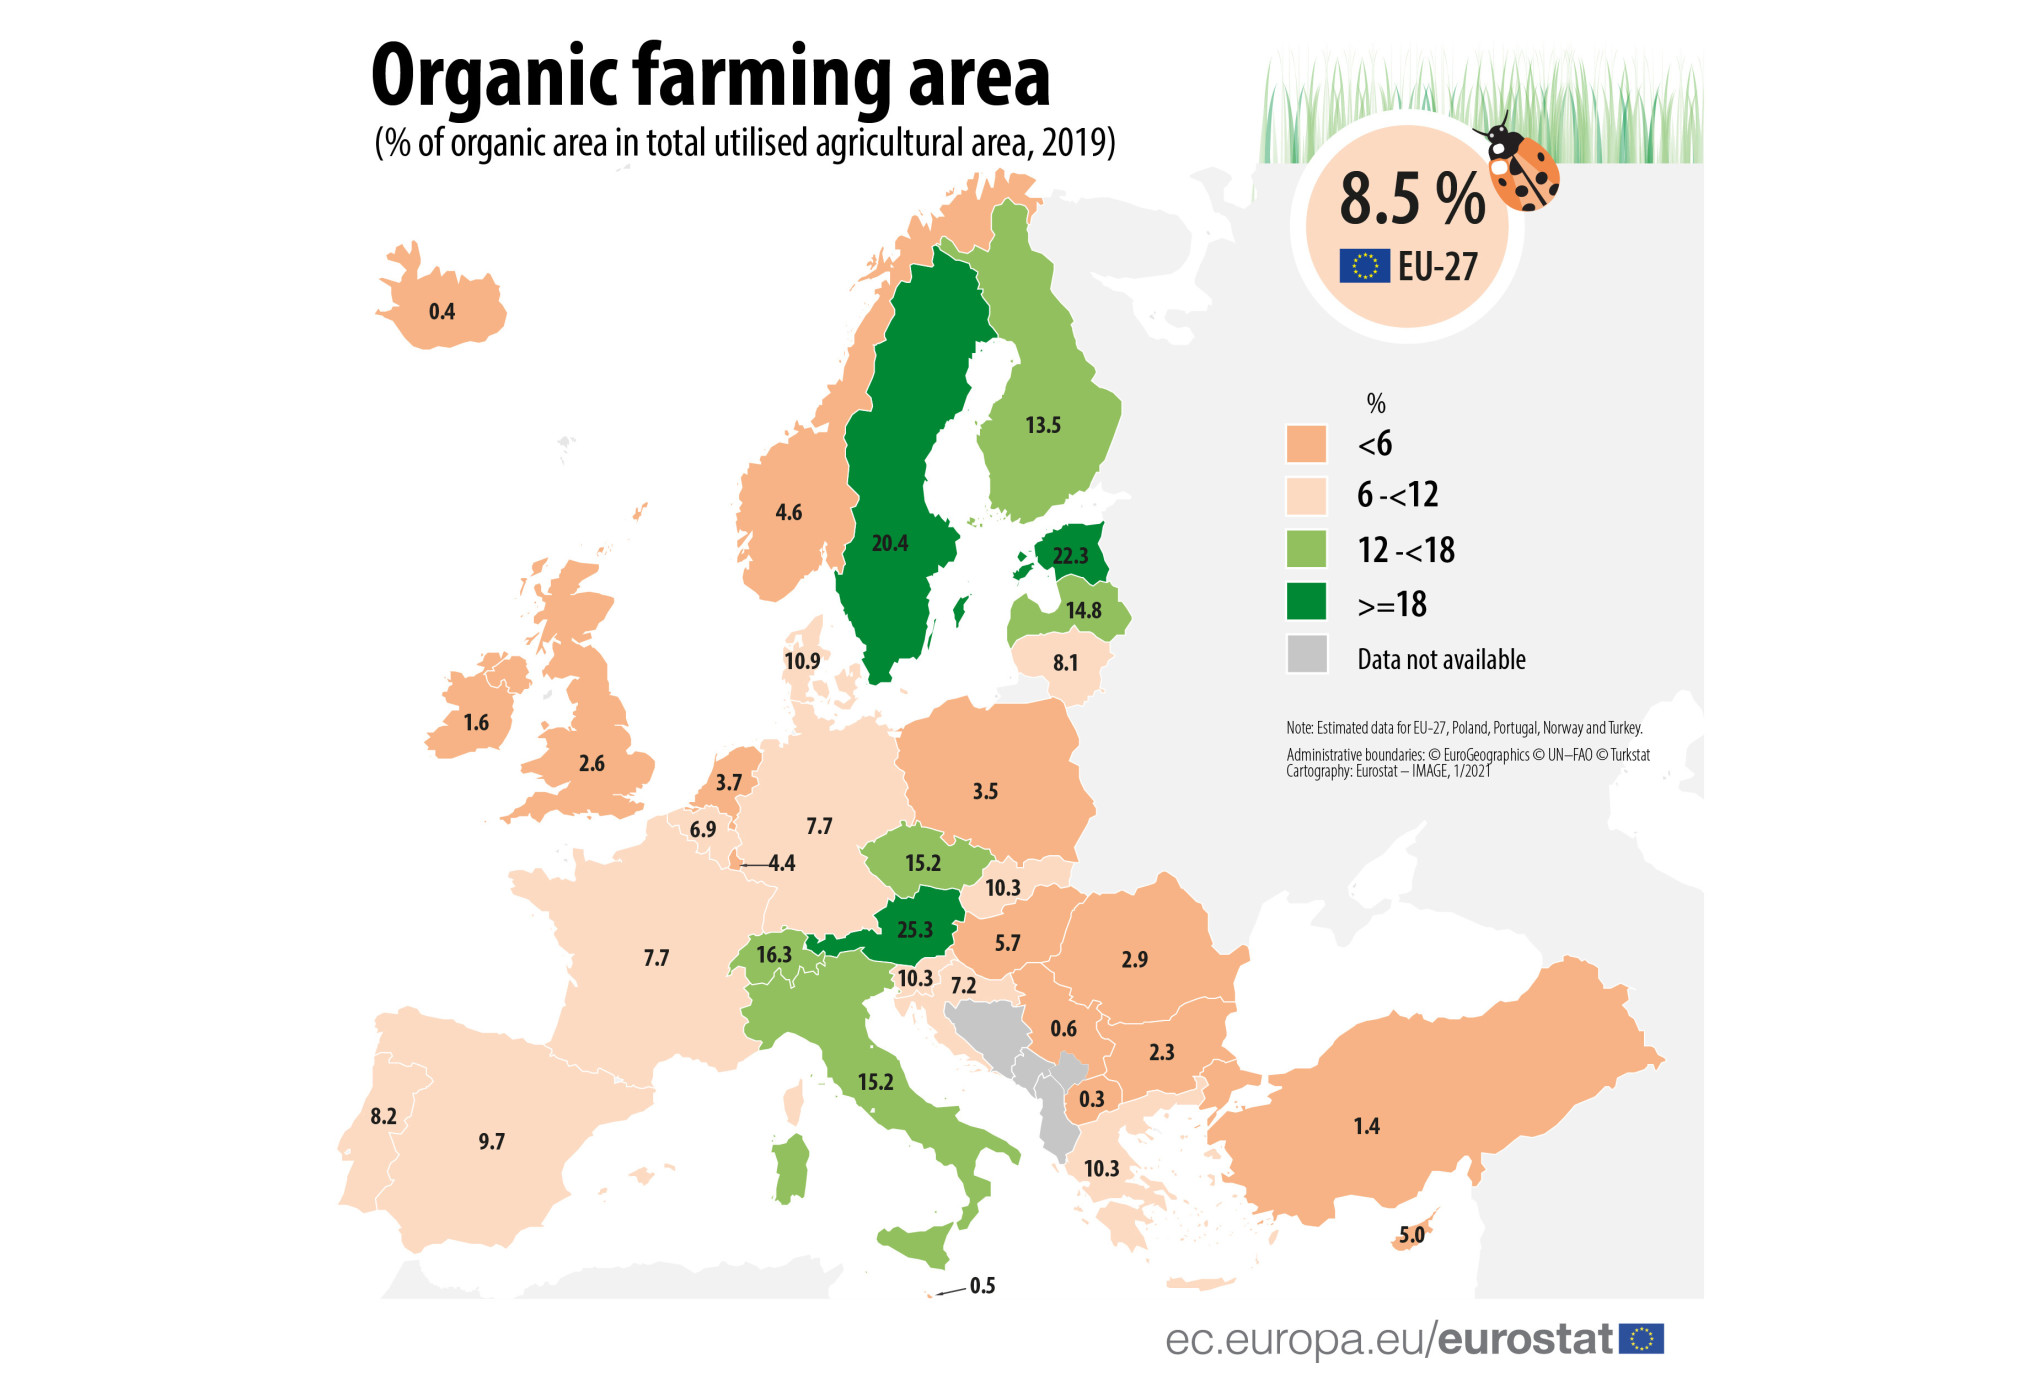 Organic farming area in the EU by country, 2019 map2